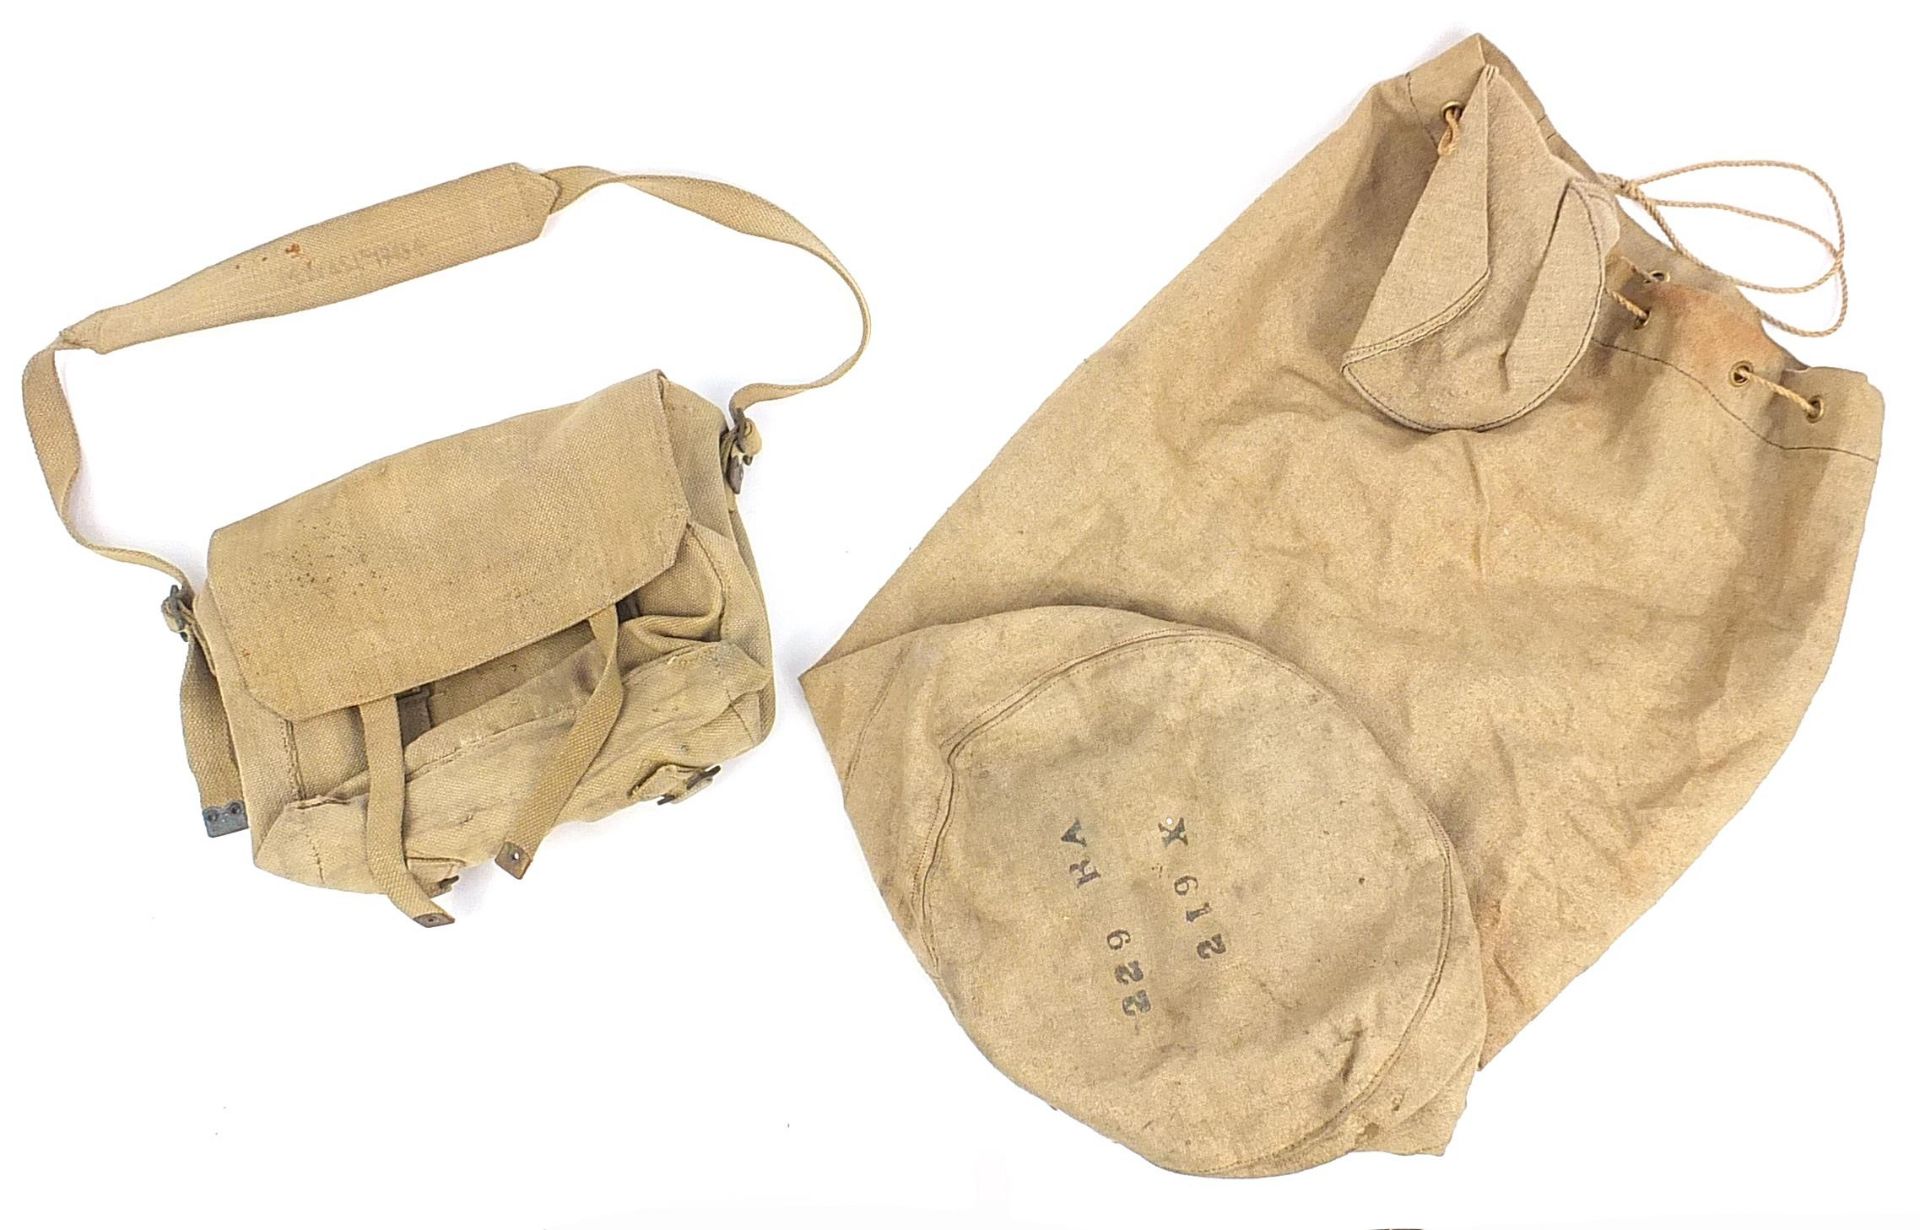 World War II military canvas satchel J C A H 1942 together with a canvas kitbag, 72cm in length